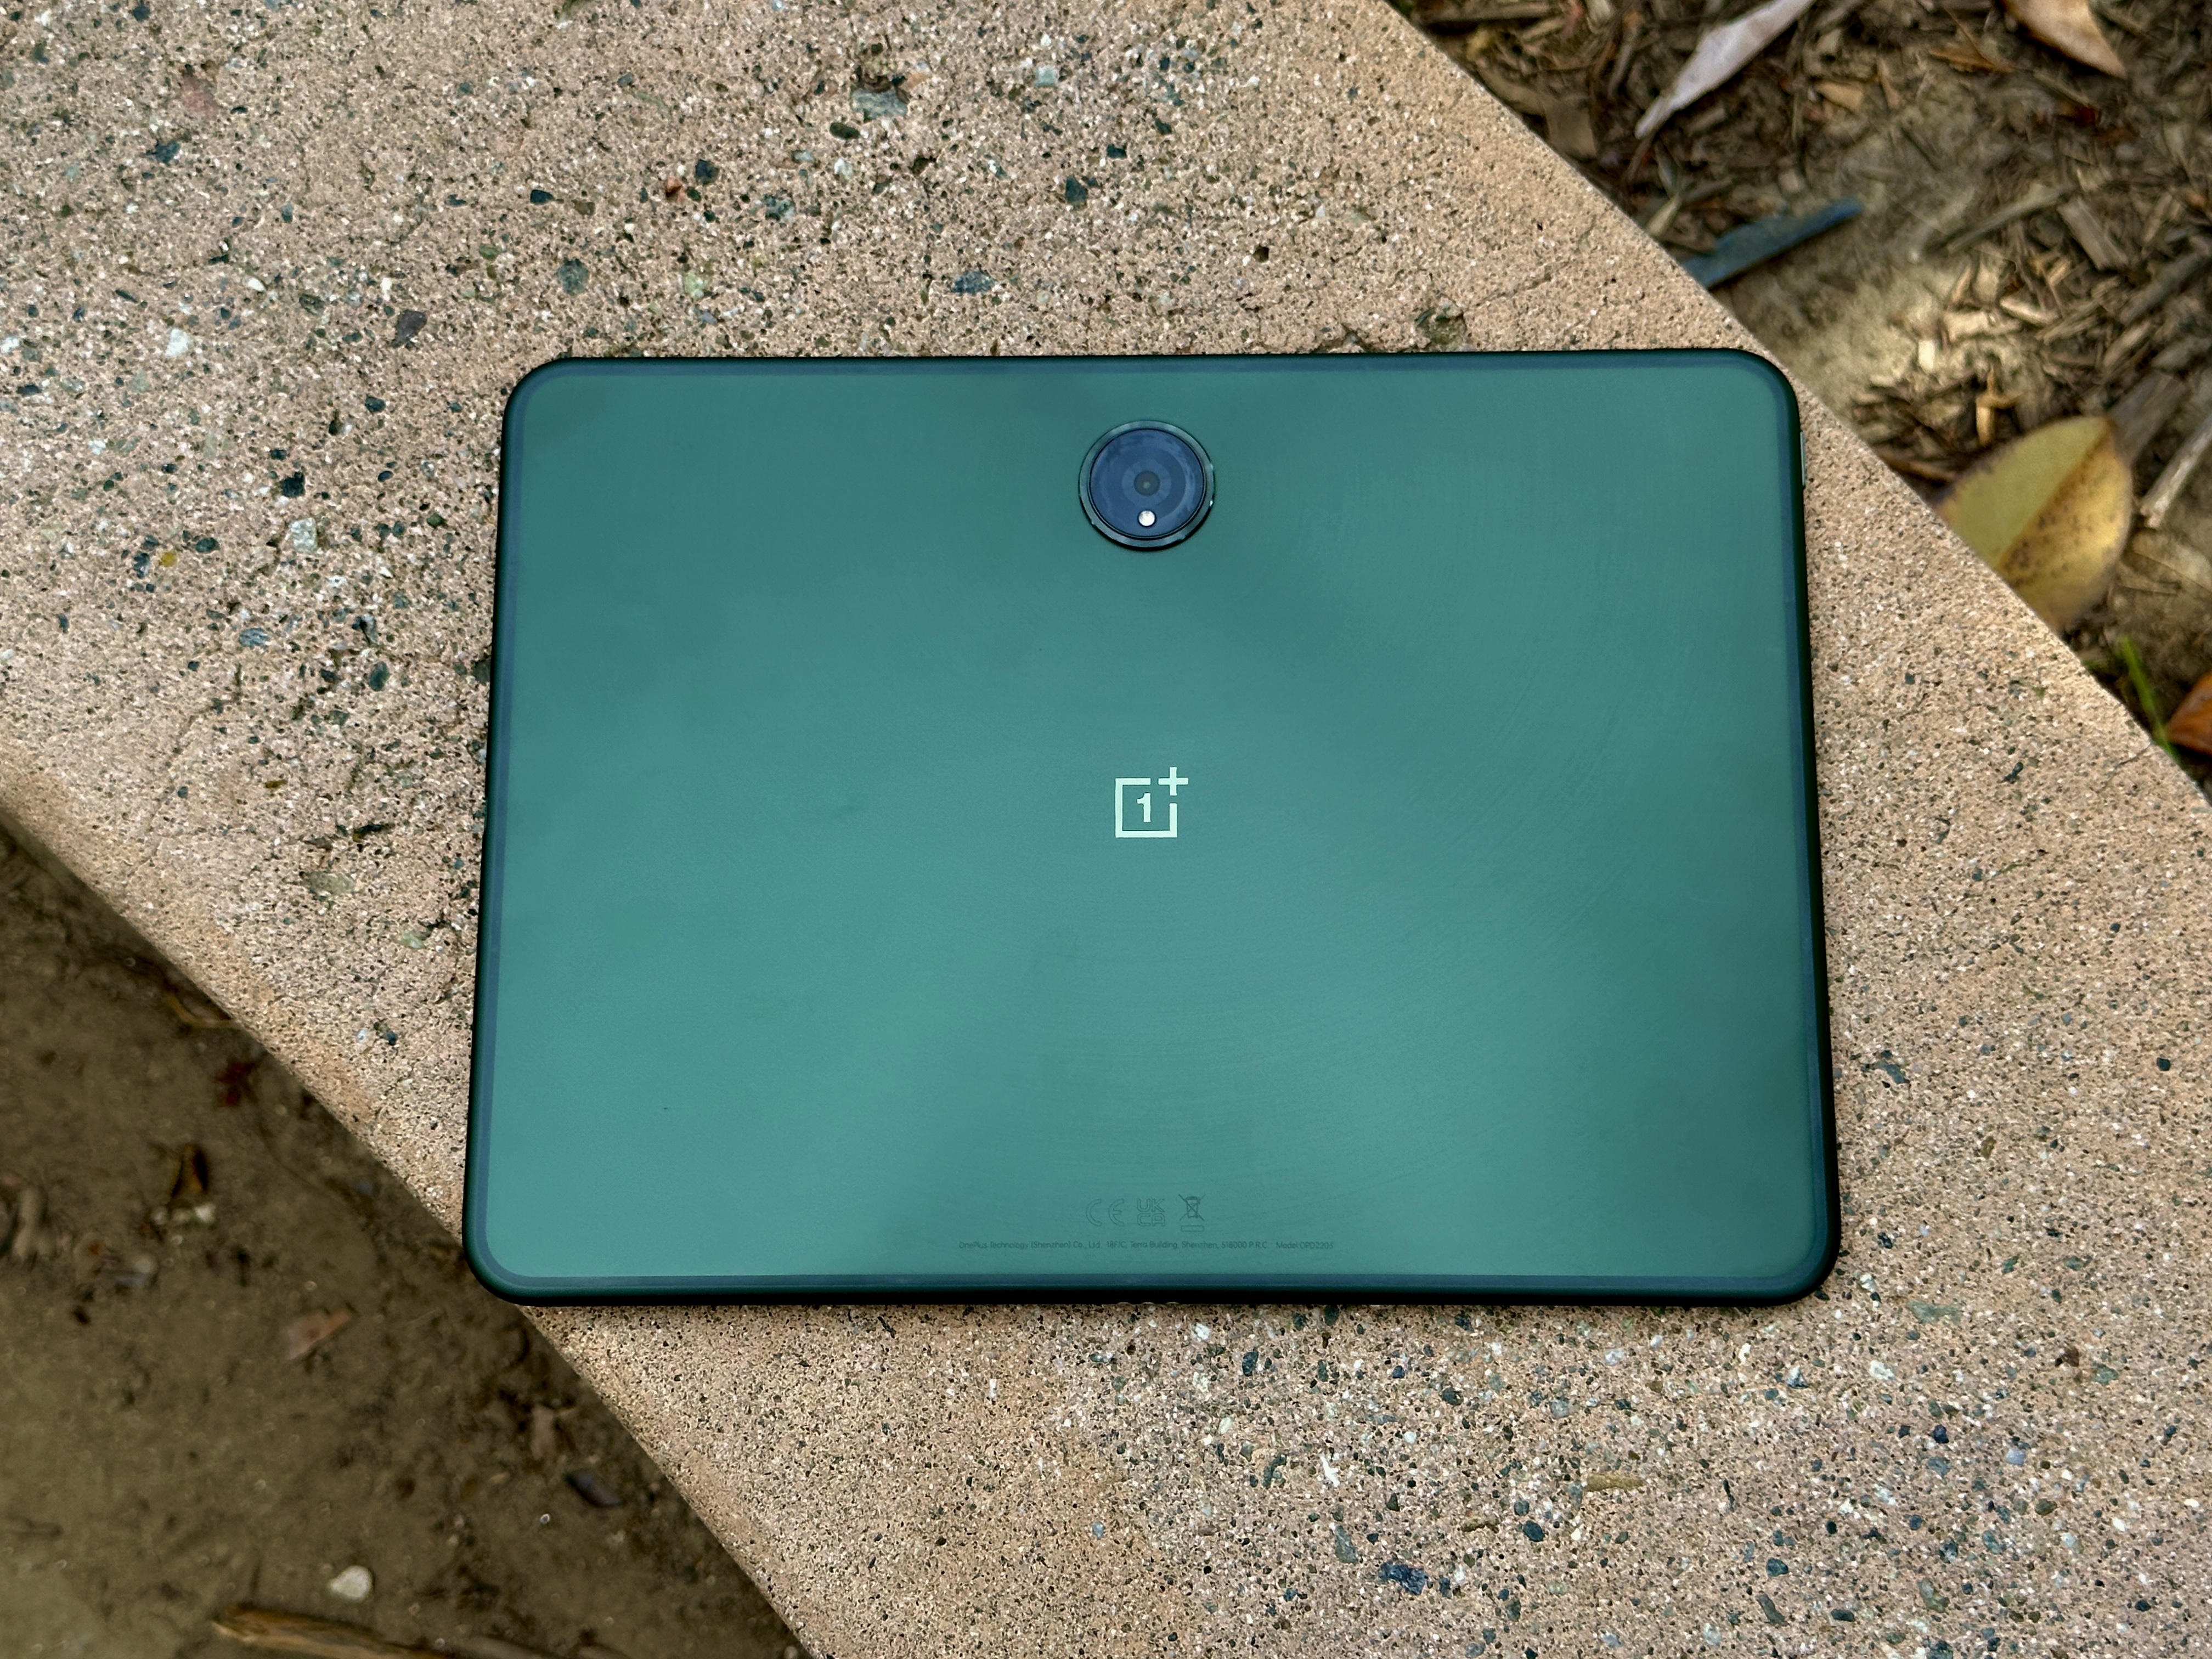 OnePlus Pad | 8/128 GB | World’s First 7:5 144 Hz Display | 9510 mAh Battery | 67W SuperVooc Charge